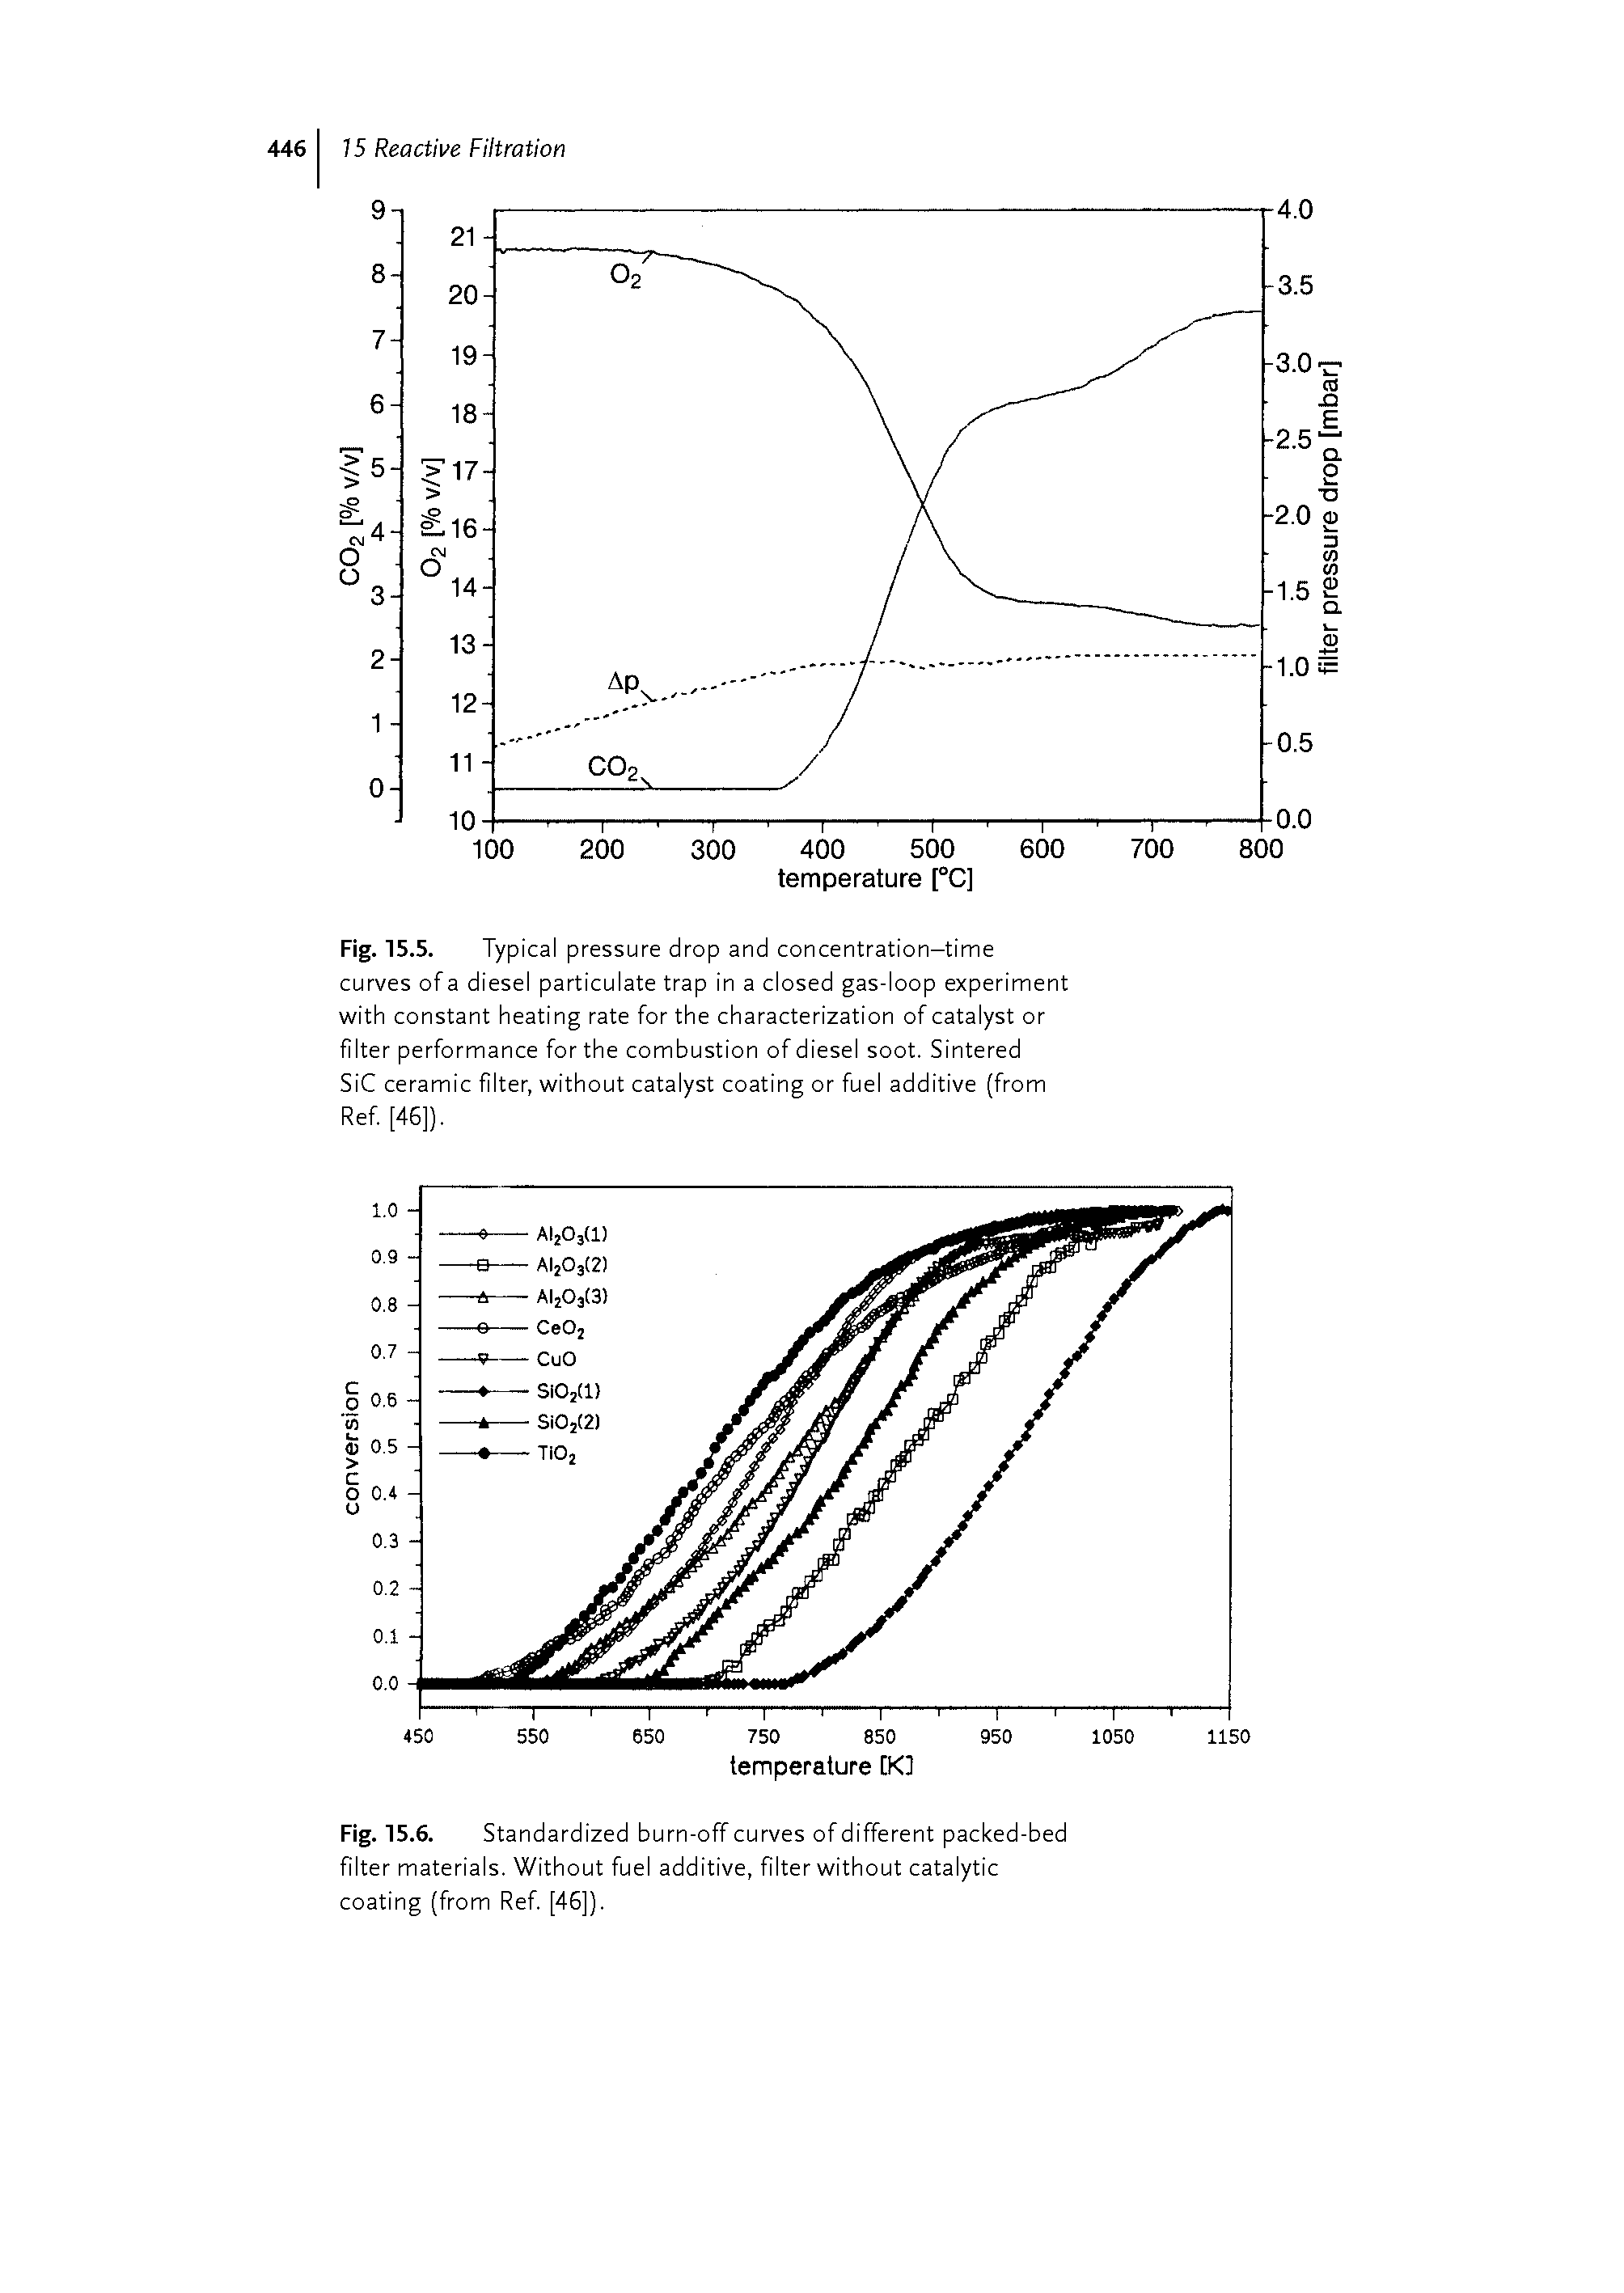 Fig. 15.6. Standardized burn-off curves of different packed-bed filter materials. Without fuel additive, filter without catalytic coating (from Ref. [46]).